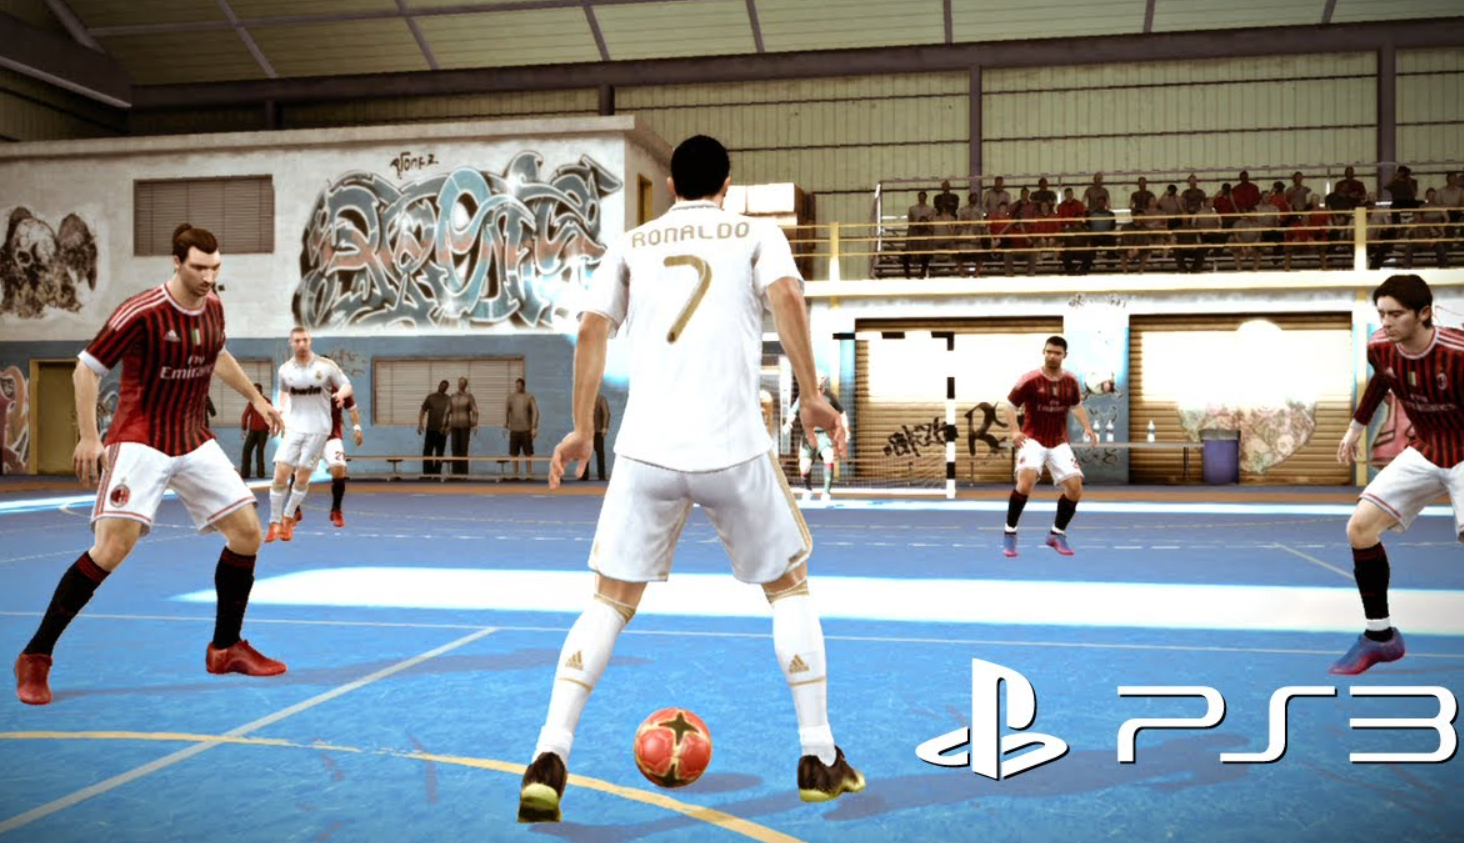 Brief overview of the FIFA Street series